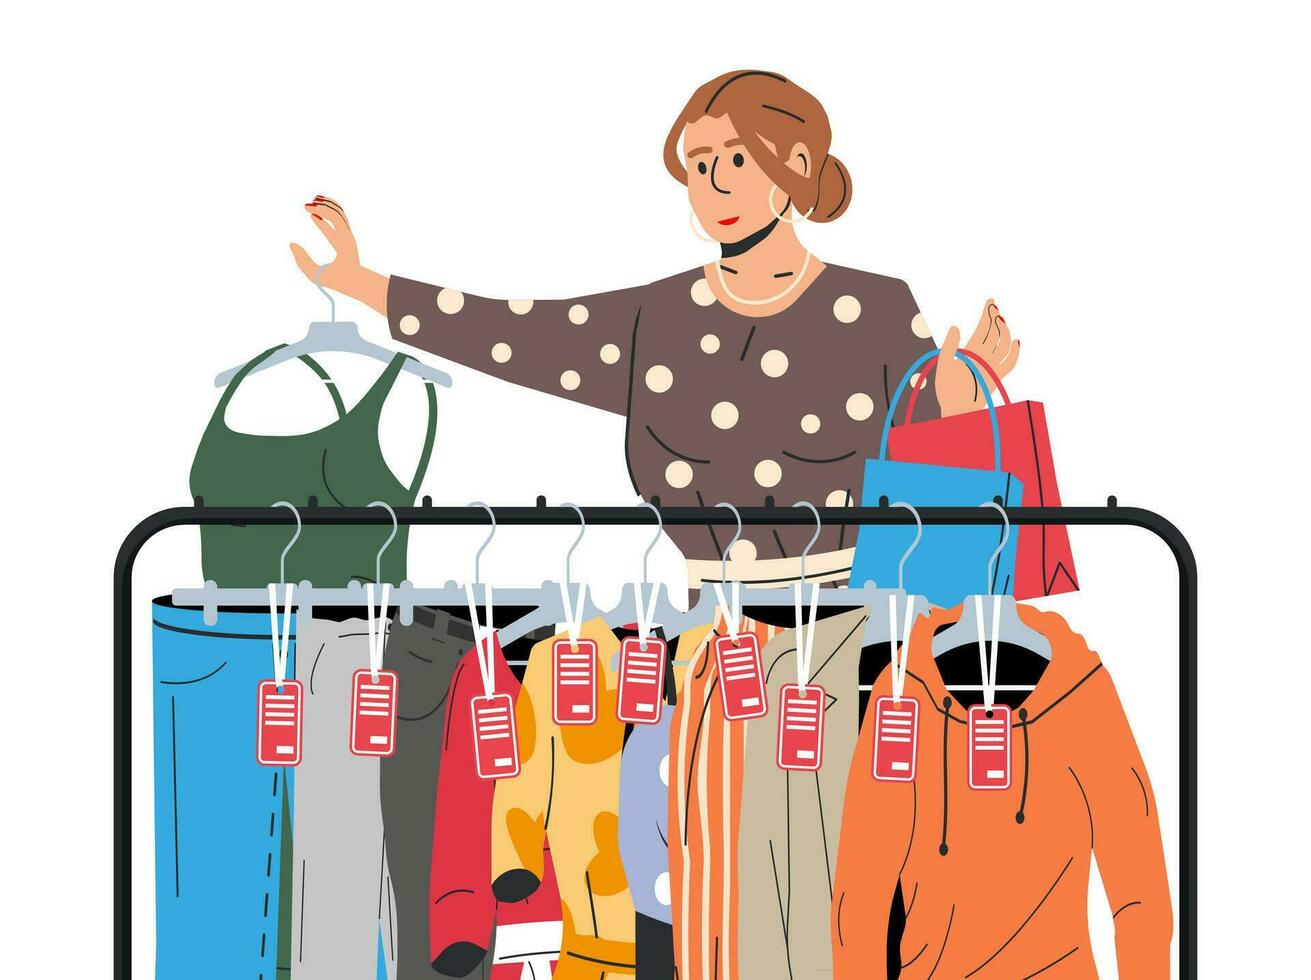 Woman Near Rack with Clothes. Womens Clothes on Hanger. Home or Shop Wardrobe. Clothes and Accessories. Various Hanging Clothing. Jacket, Shirt, Jeans, Pants. Cartoon Flat Vector Illustration